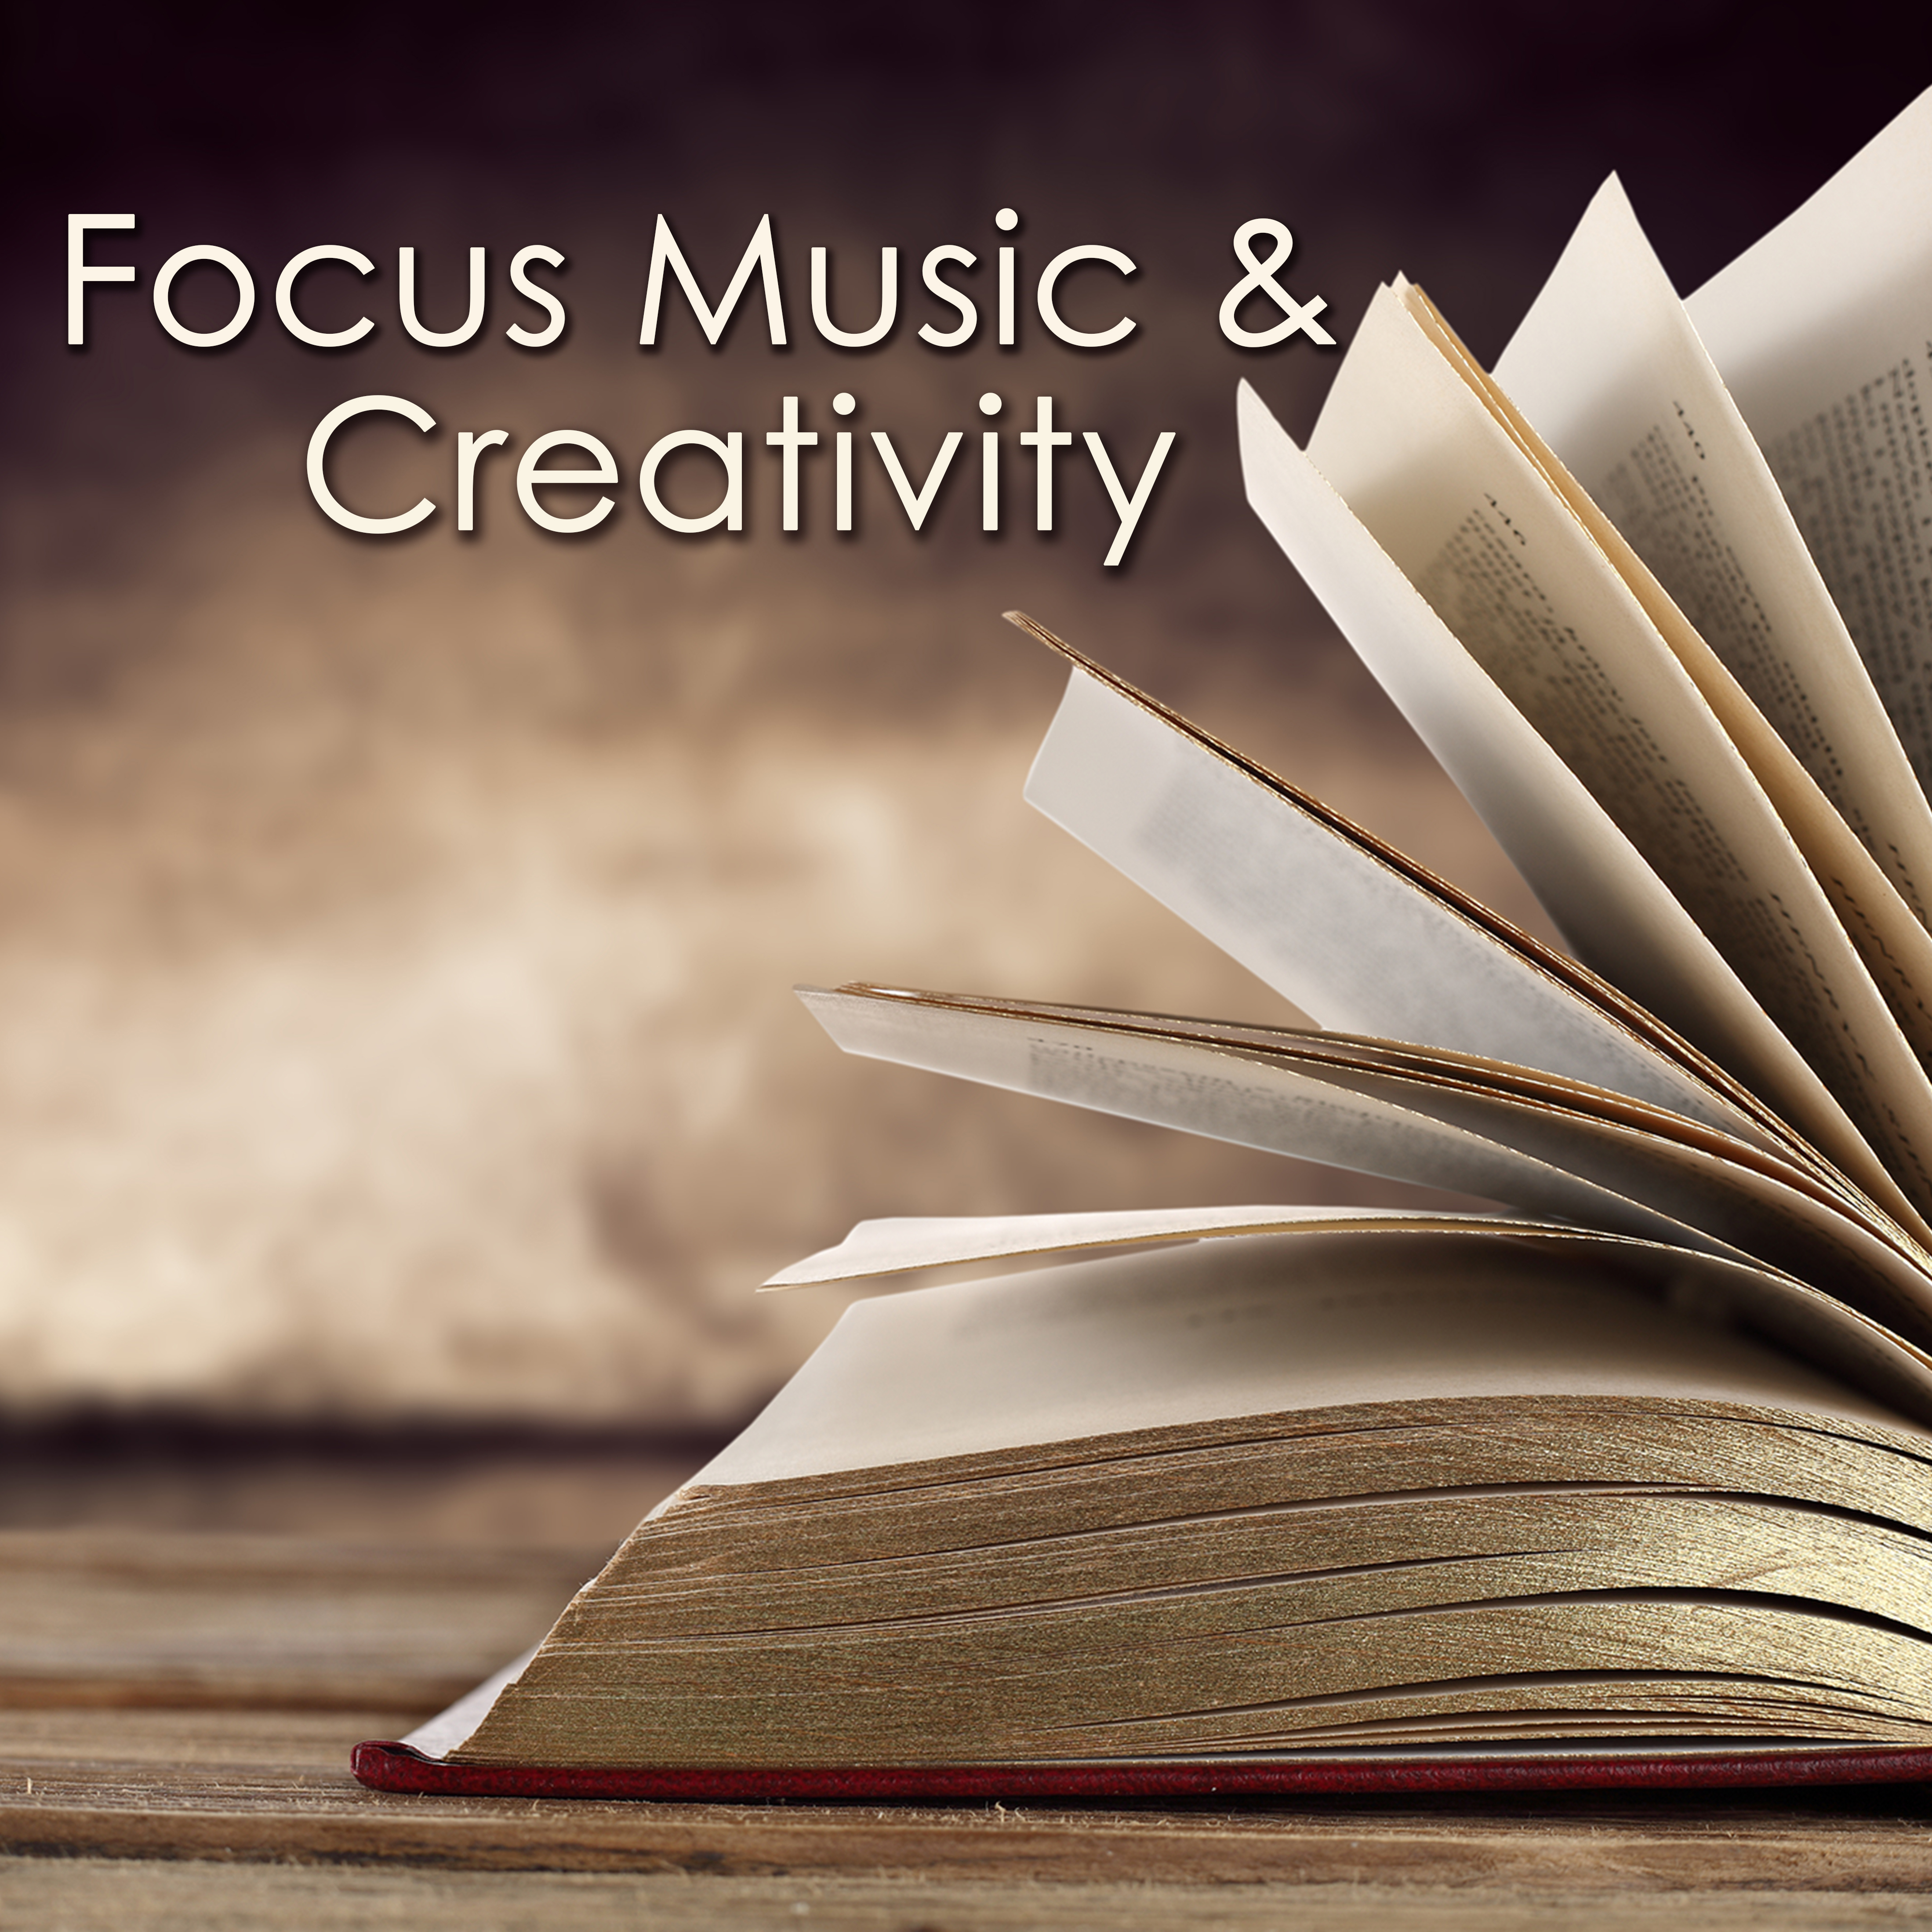 Focus Music  Creativity  Instrumental Royalty Free Music for Studying, New Age Music to Improve Concentration, Fast Reading  Learning